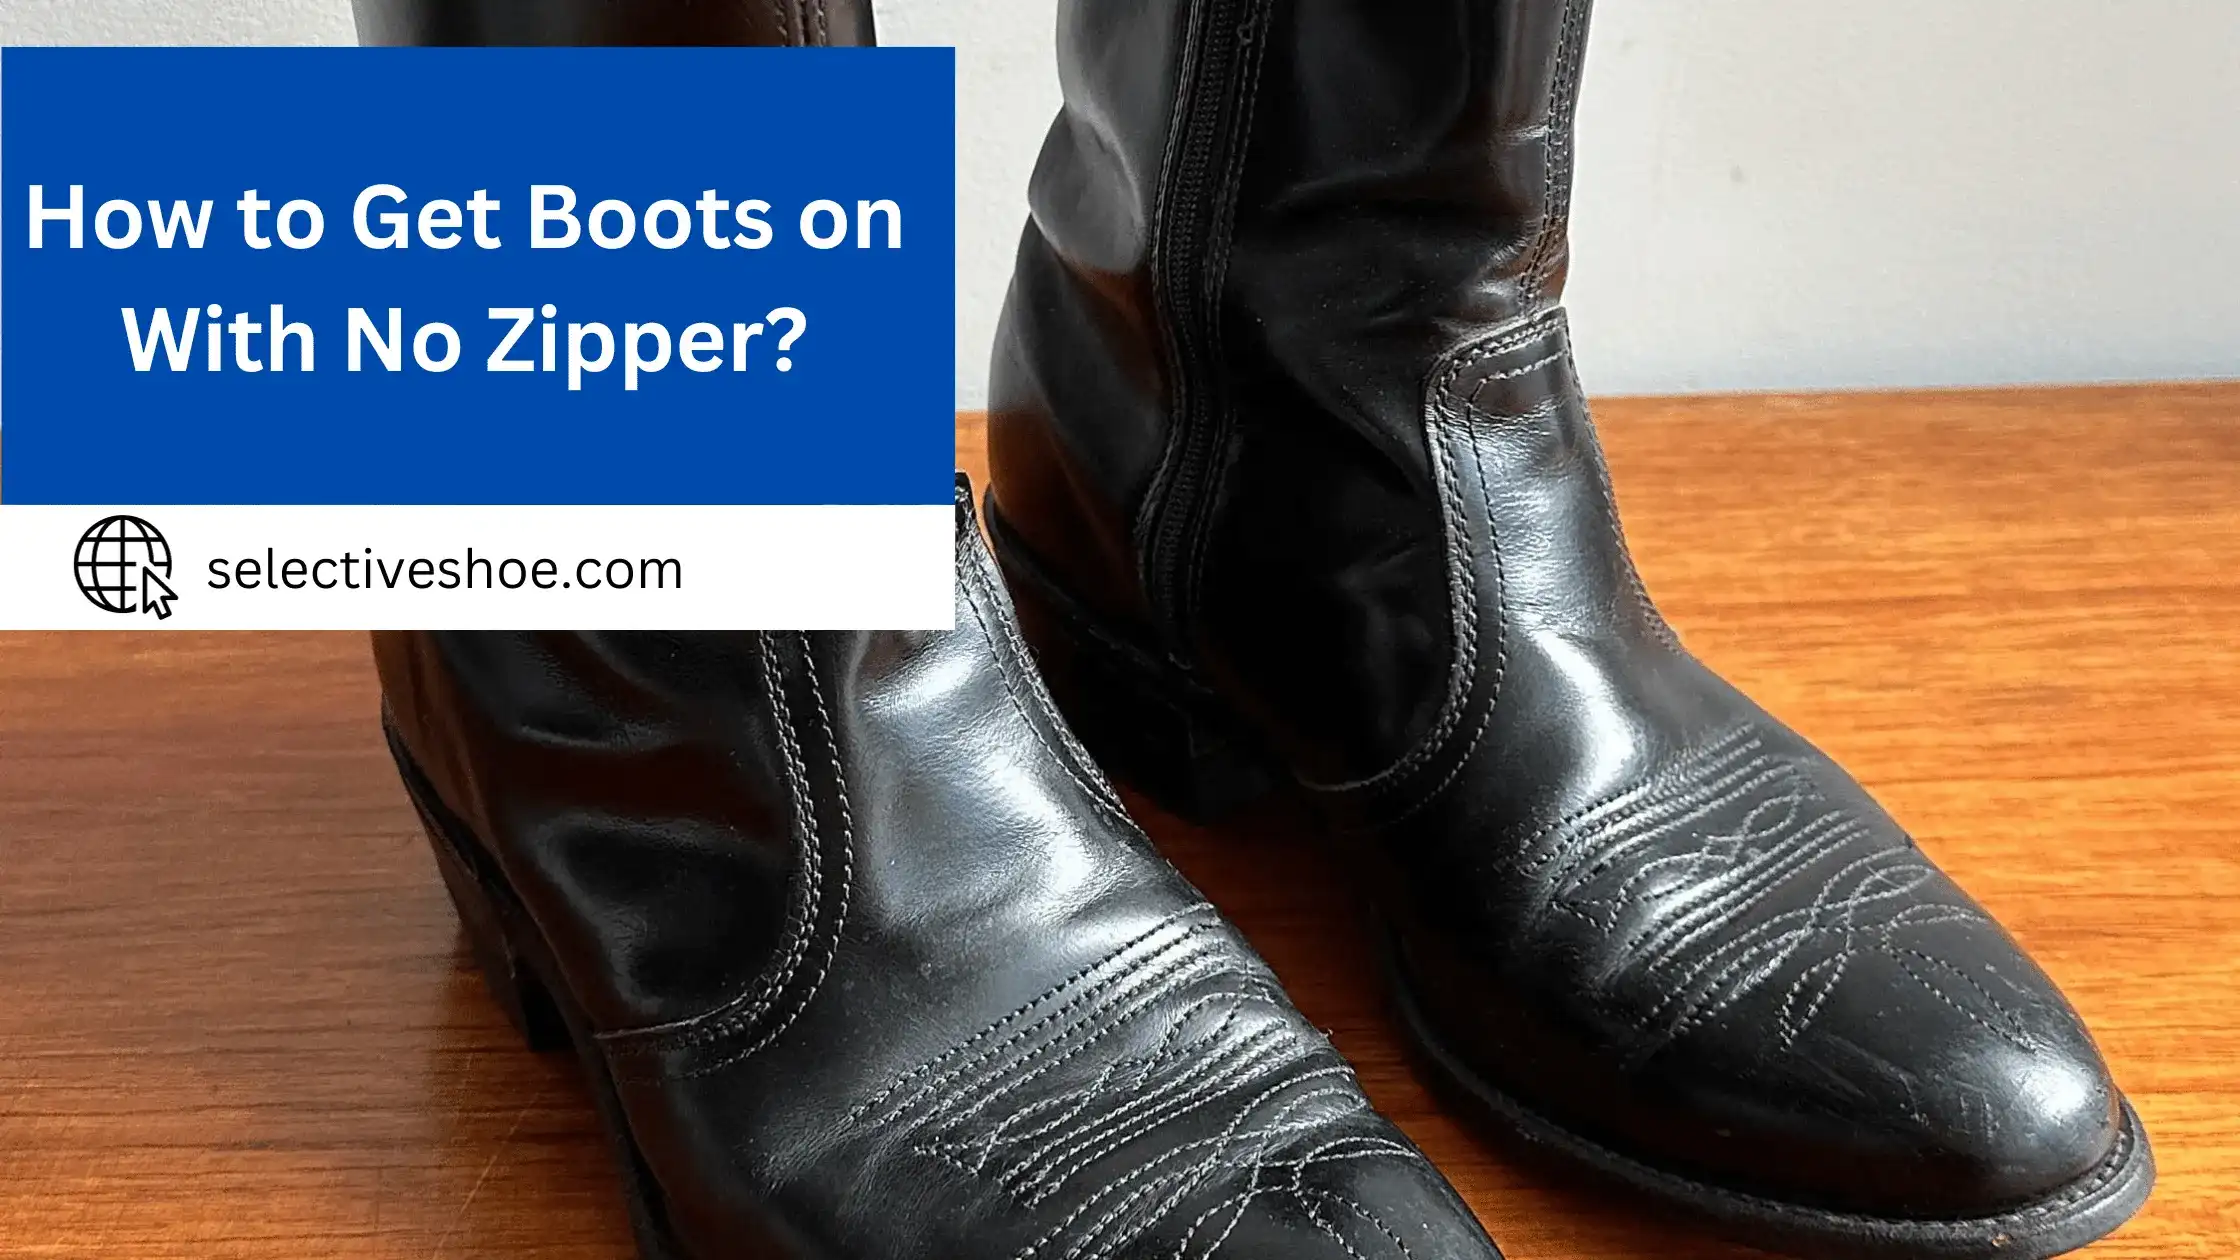 How to Get Boots on With No Zipper? Complete Guide